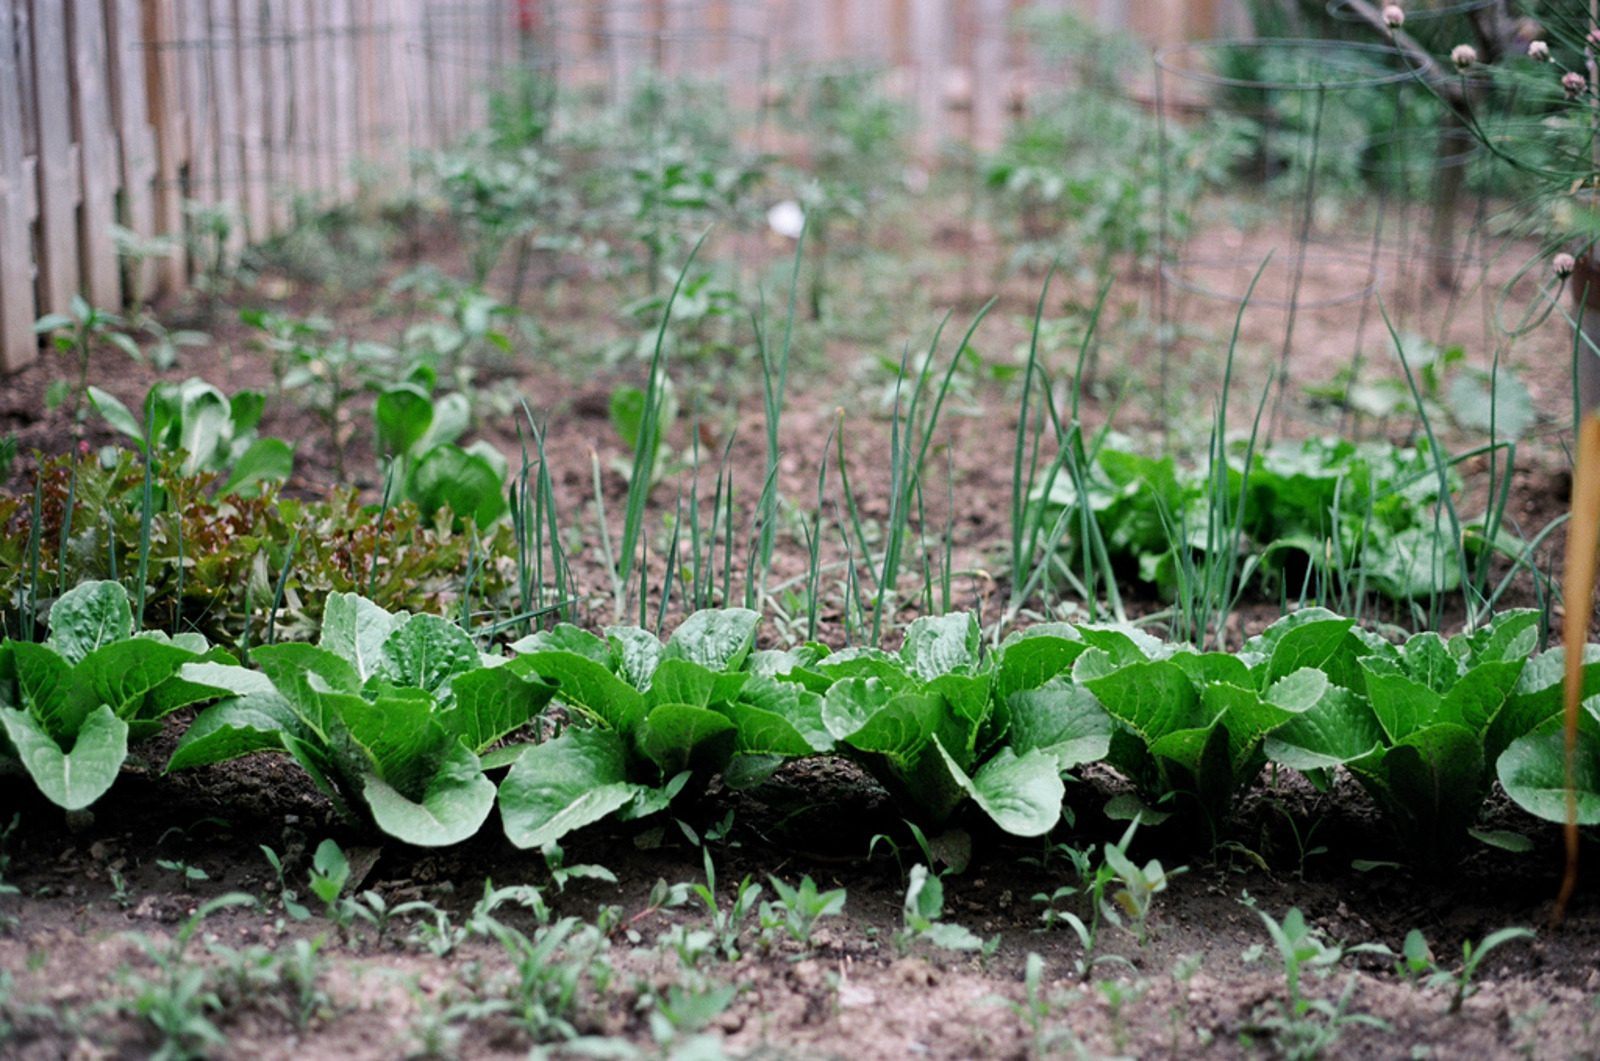 Don't Let Your Garden Become An Eco-Nightmare!Don't Let Your Garden Become An Eco-Nightmare!